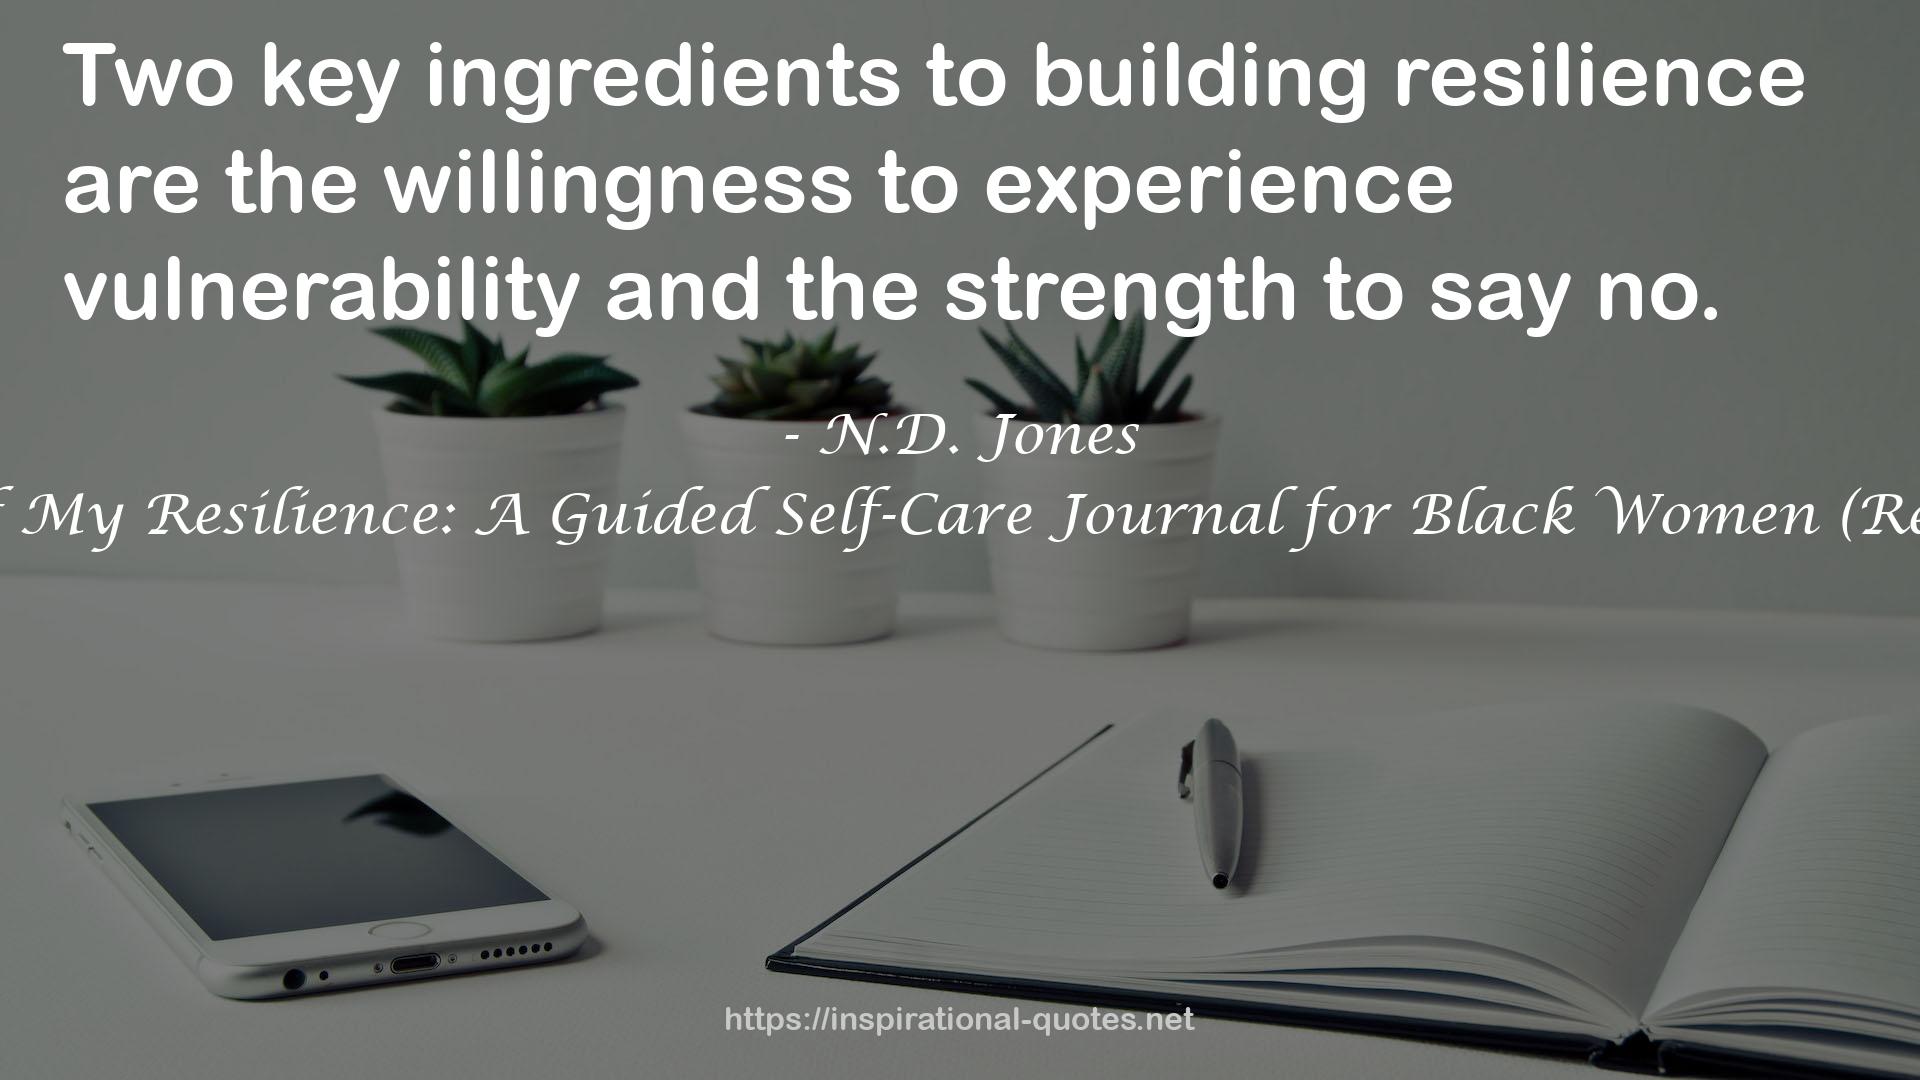 The Color of My Resilience: A Guided Self-Care Journal for Black Women (Resilience, #2) QUOTES